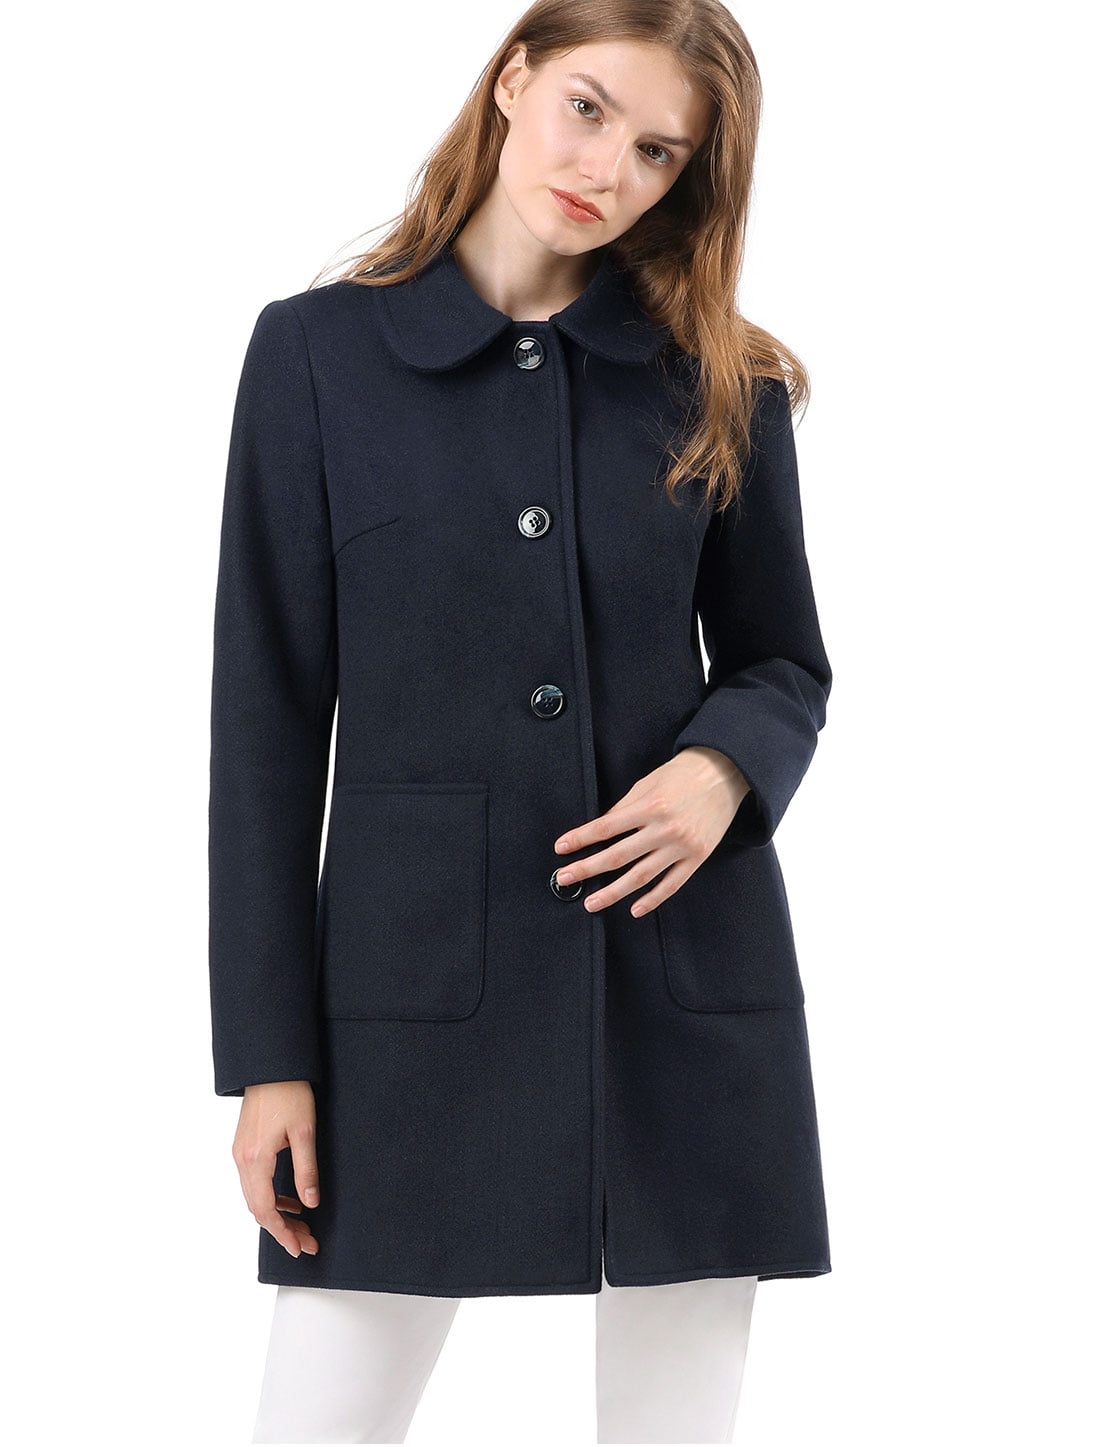 Women's Turn Down Collar Single Breasted Winter Outwear Trench Coat ...